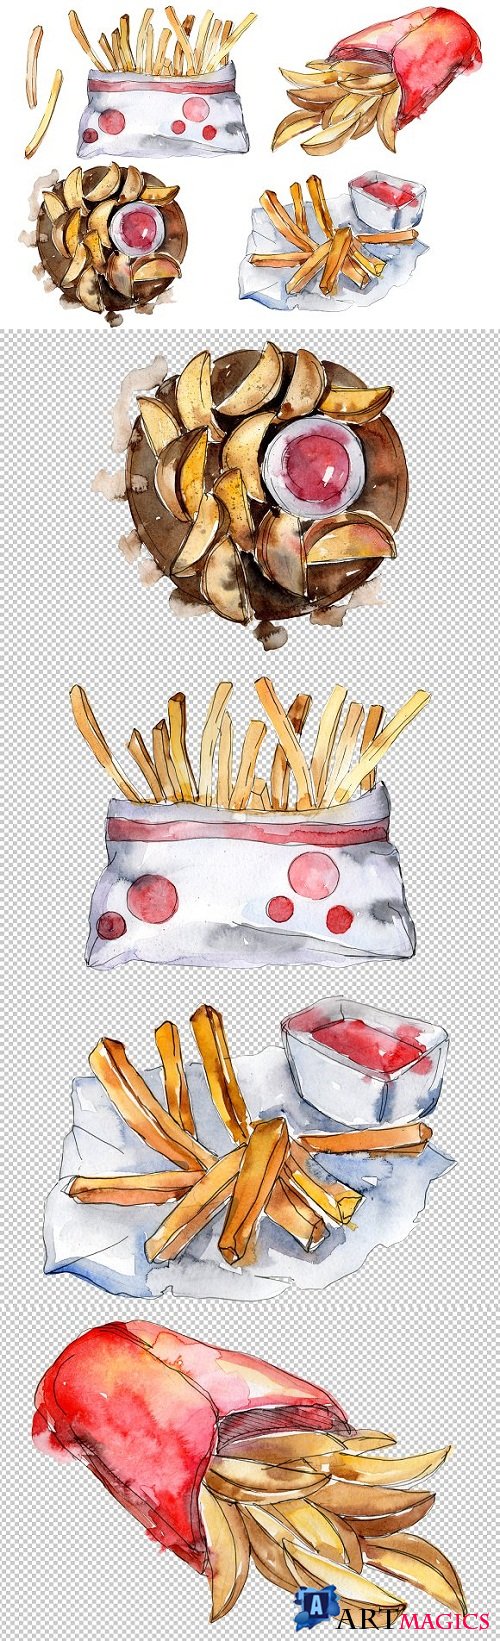 French fries with sauce Watercolor  - 3476828